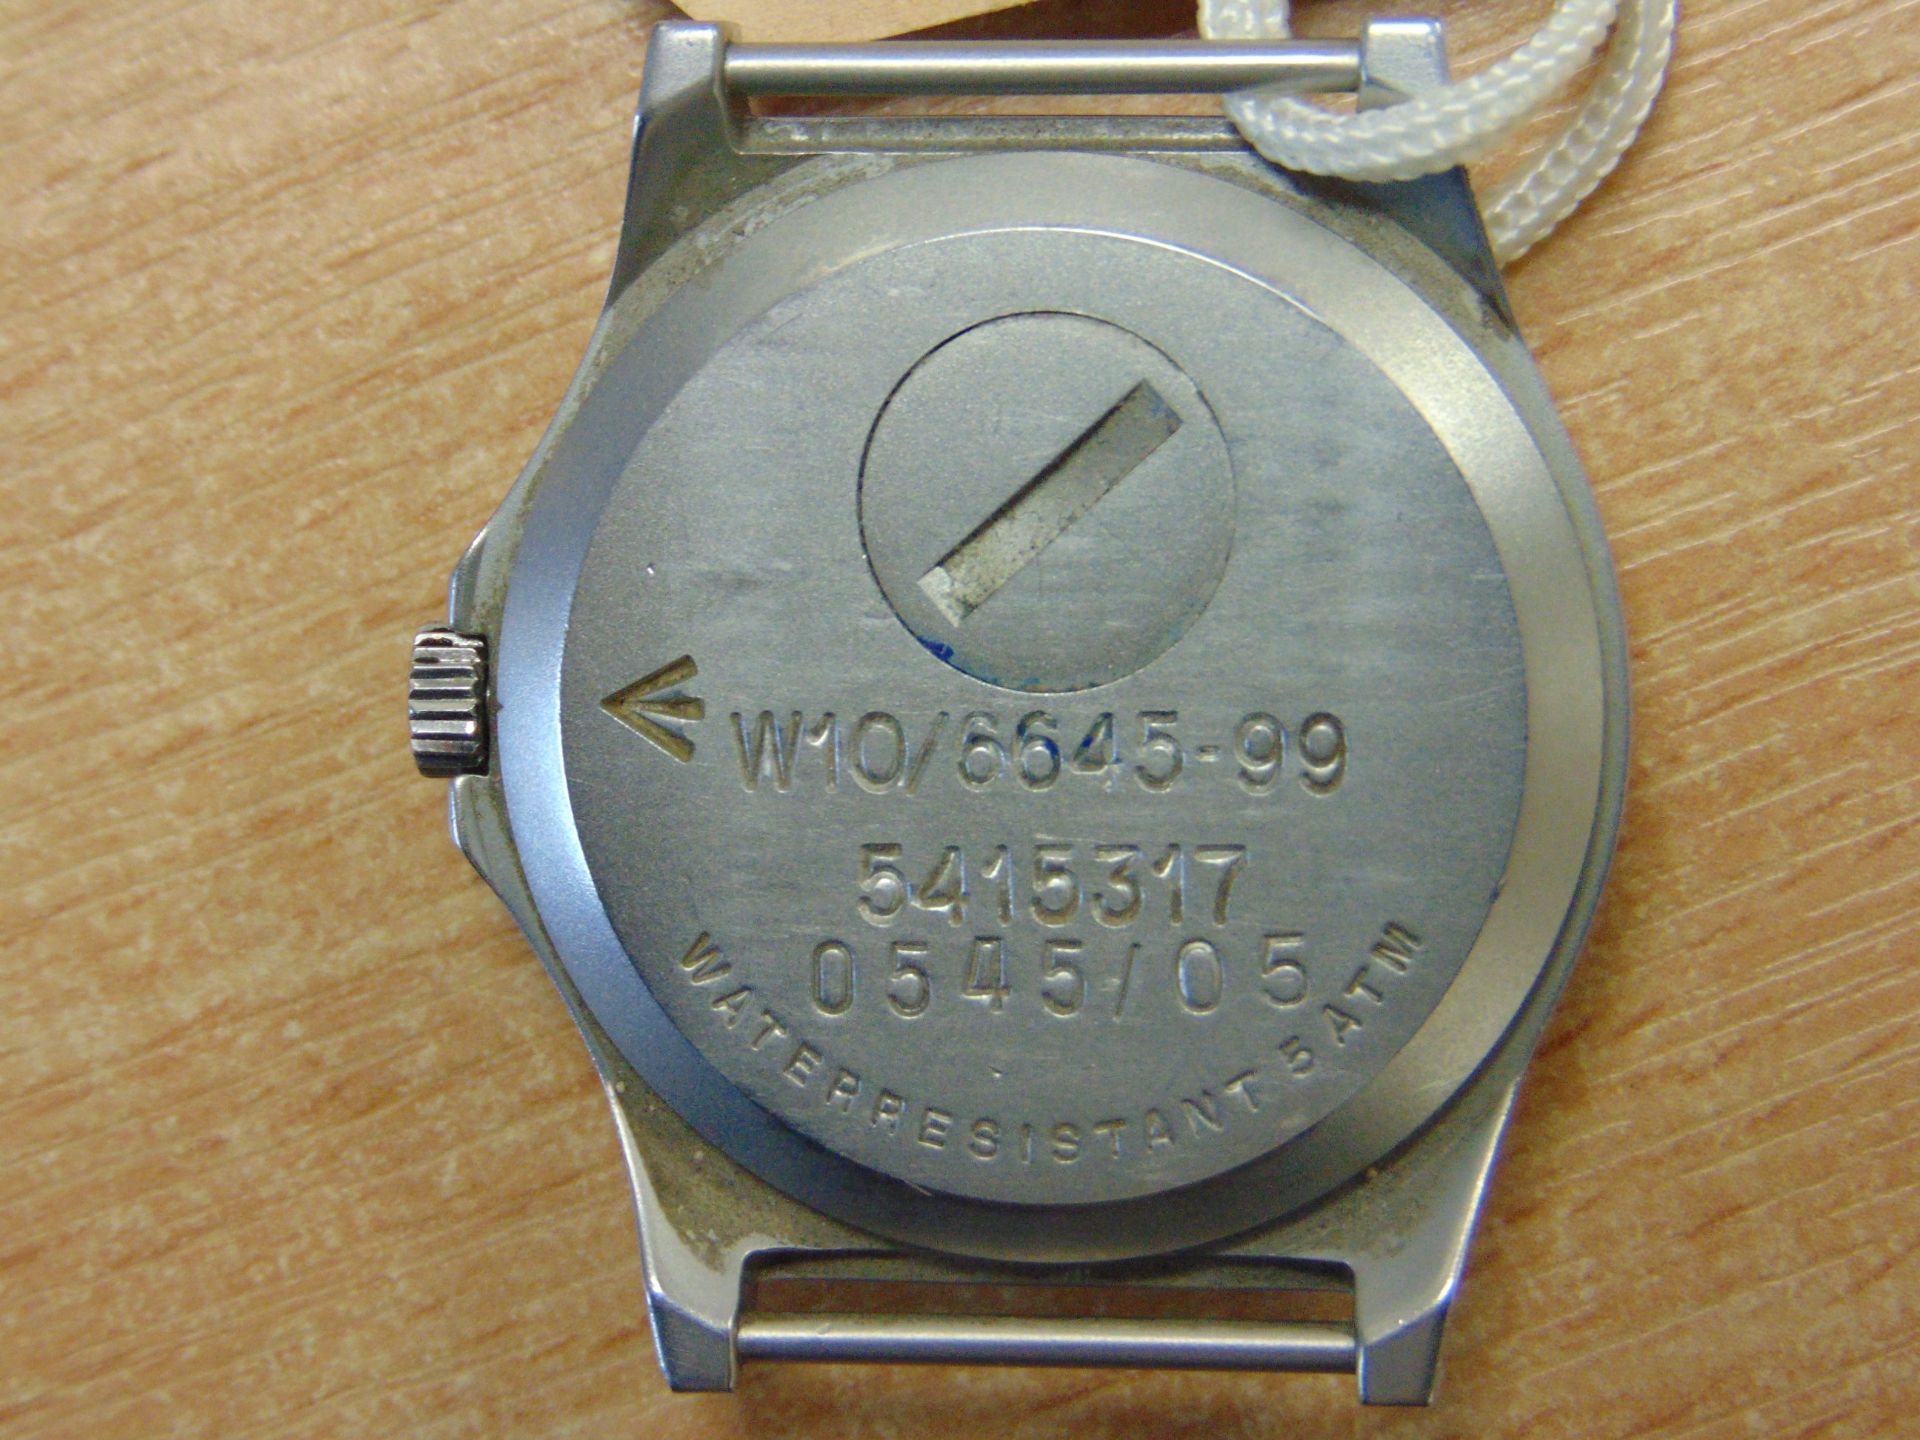 CWC W10 BRITISH ARMY SERVICE WATCH -WATER RESISTANT TO 5 ATM NATO MARKS DATE 2005 *CHIP IN GLASS* - Image 3 of 7